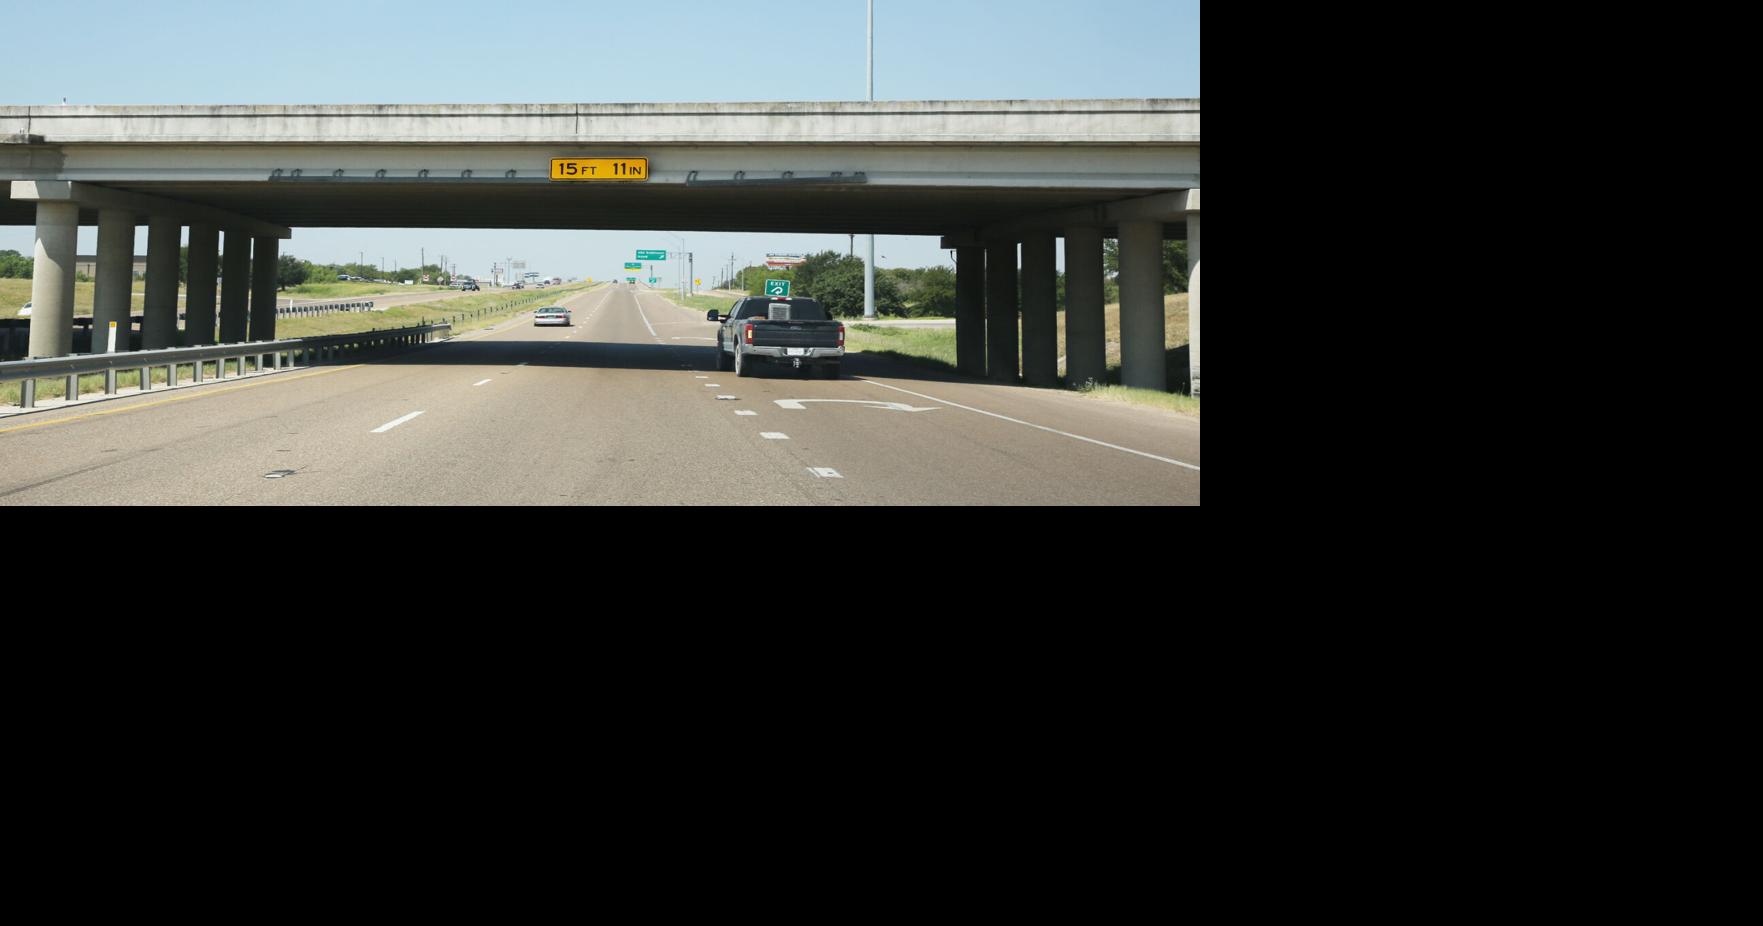 Waco-area traffic trials go for federal funding